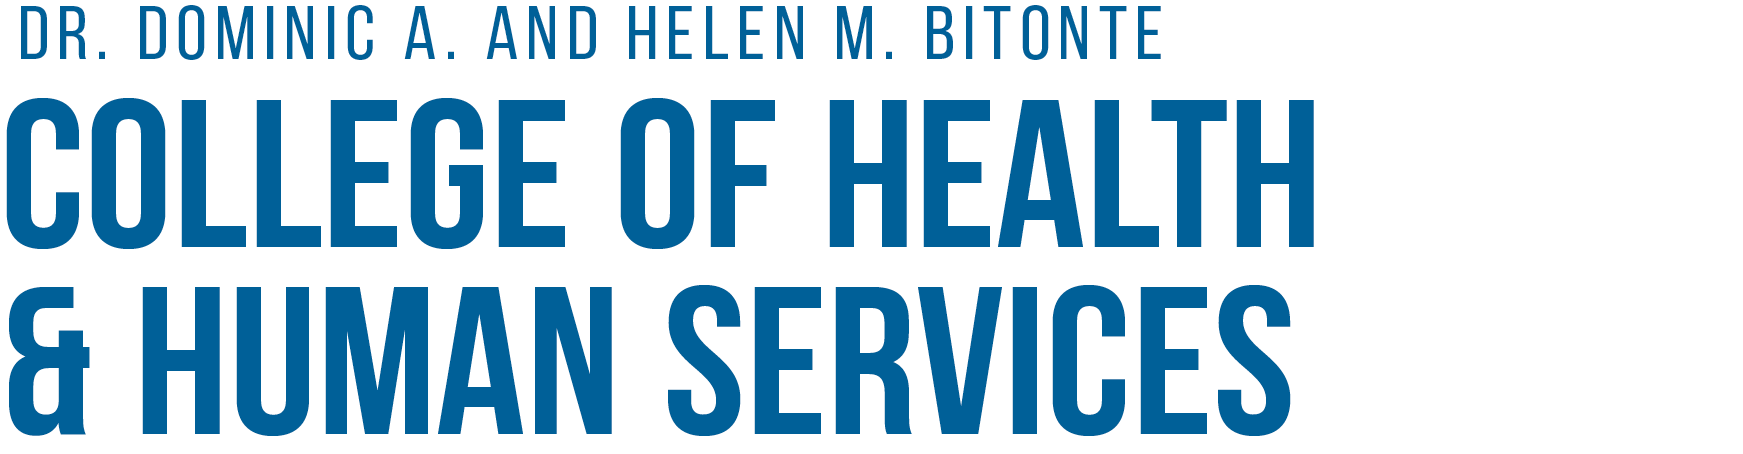 Dr. Dominic A. and Helen M. Bitonte College of Health & Human Services